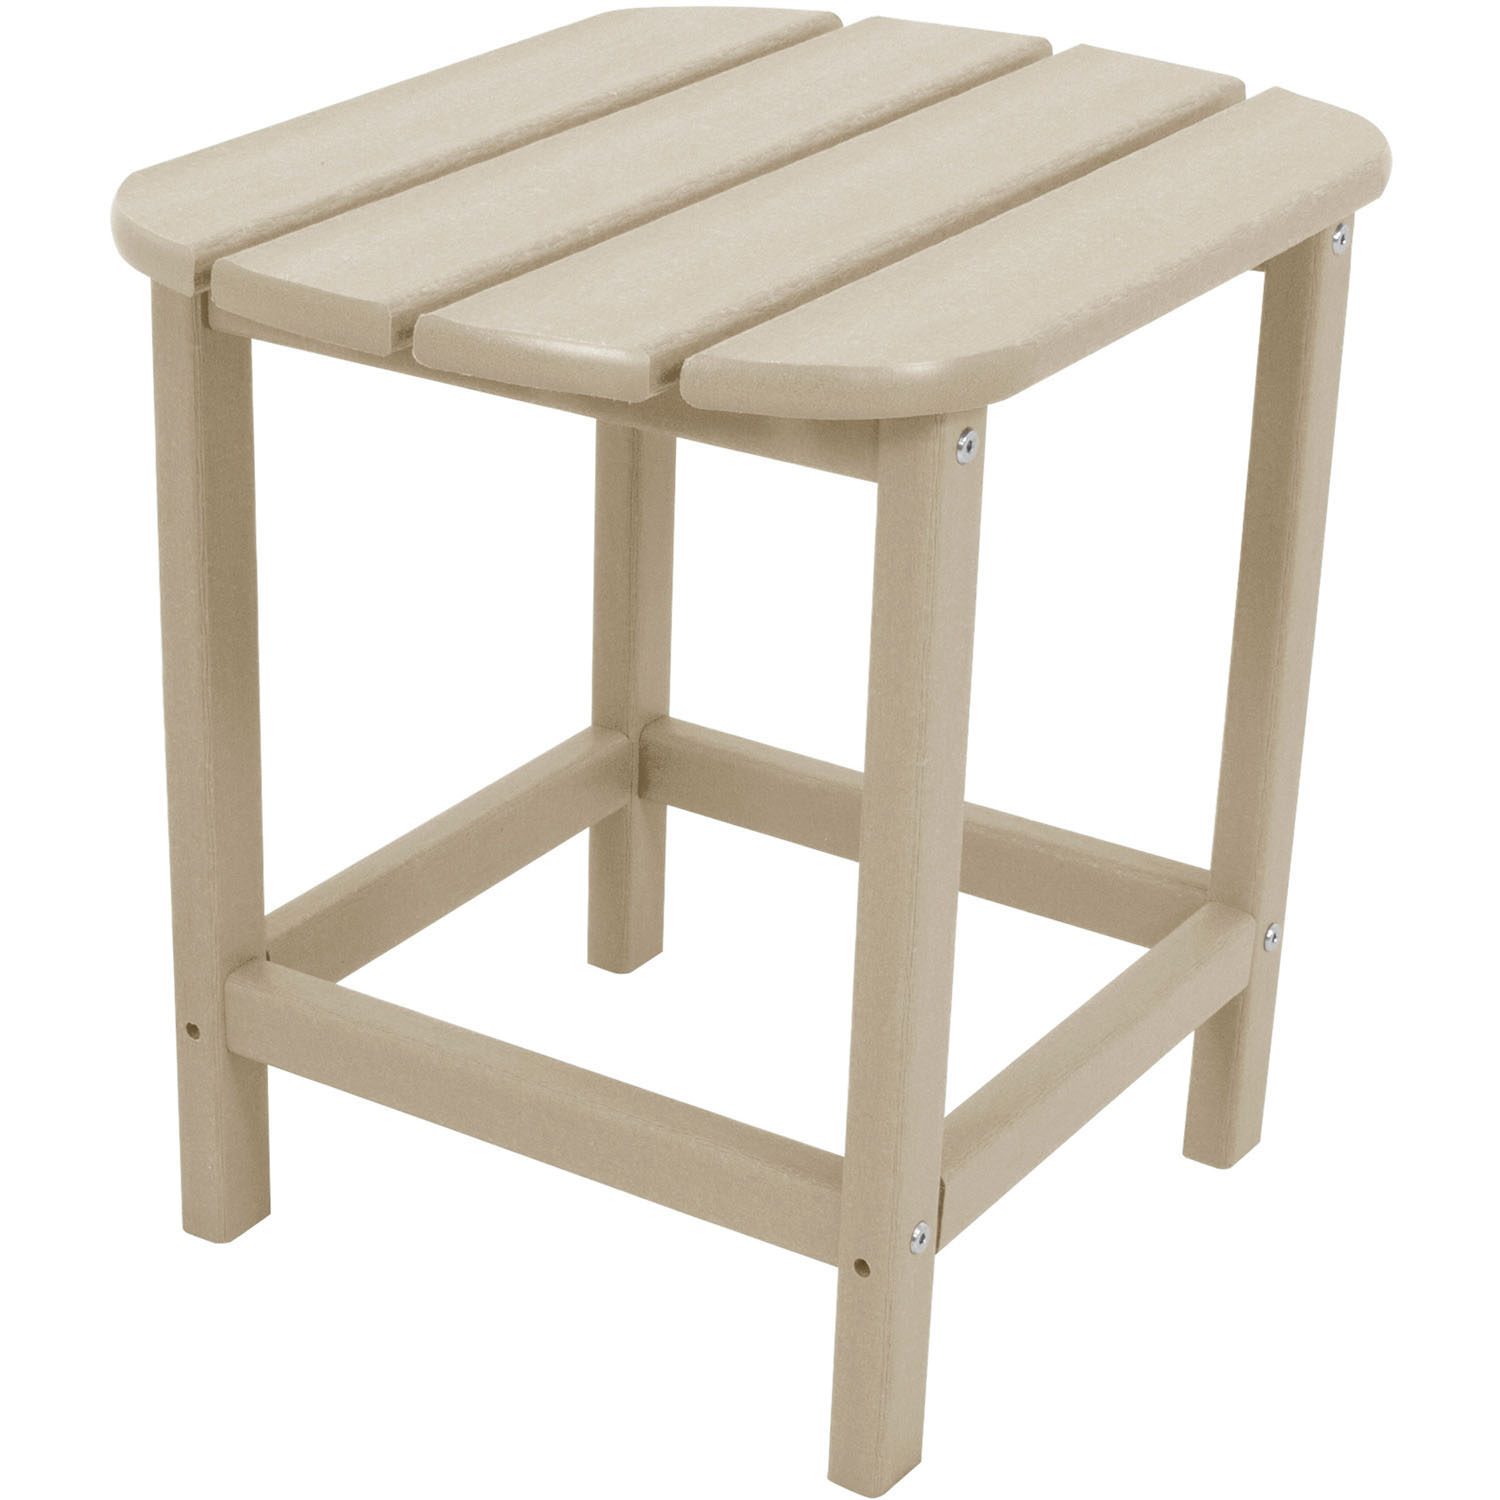 Hanover All-Weather Side Table - White - image 2 of 11